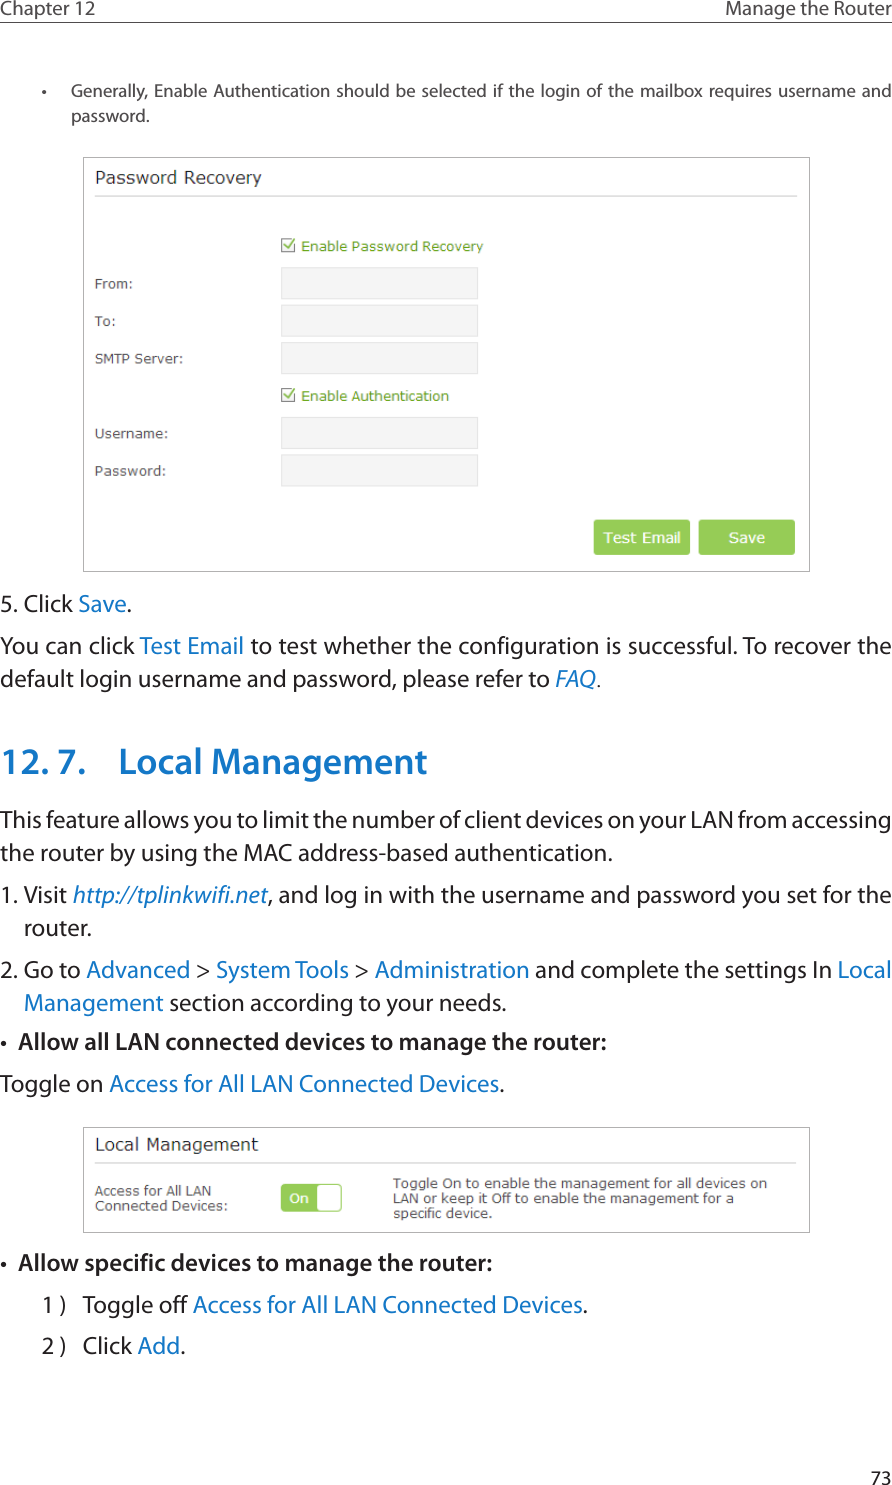 73Chapter 12 Manage the Router •  Generally, Enable Authentication should be selected if the login of the mailbox requires username and password. 5. Click Save.You can click Test Email to test whether the configuration is successful. To recover the default login username and password, please refer to FAQ.12. 7.  Local ManagementThis feature allows you to limit the number of client devices on your LAN from accessing the router by using the MAC address-based authentication.1. Visit http://tplinkwifi.net, and log in with the username and password you set for the router.2. Go to Advanced &gt; System Tools &gt; Administration and complete the settings In Local Management section according to your needs.•  Allow all LAN connected devices to manage the router: Toggle on Access for All LAN Connected Devices.•  Allow specific devices to manage the router: 1 )  Toggle off Access for All LAN Connected Devices.2 )  Click Add.